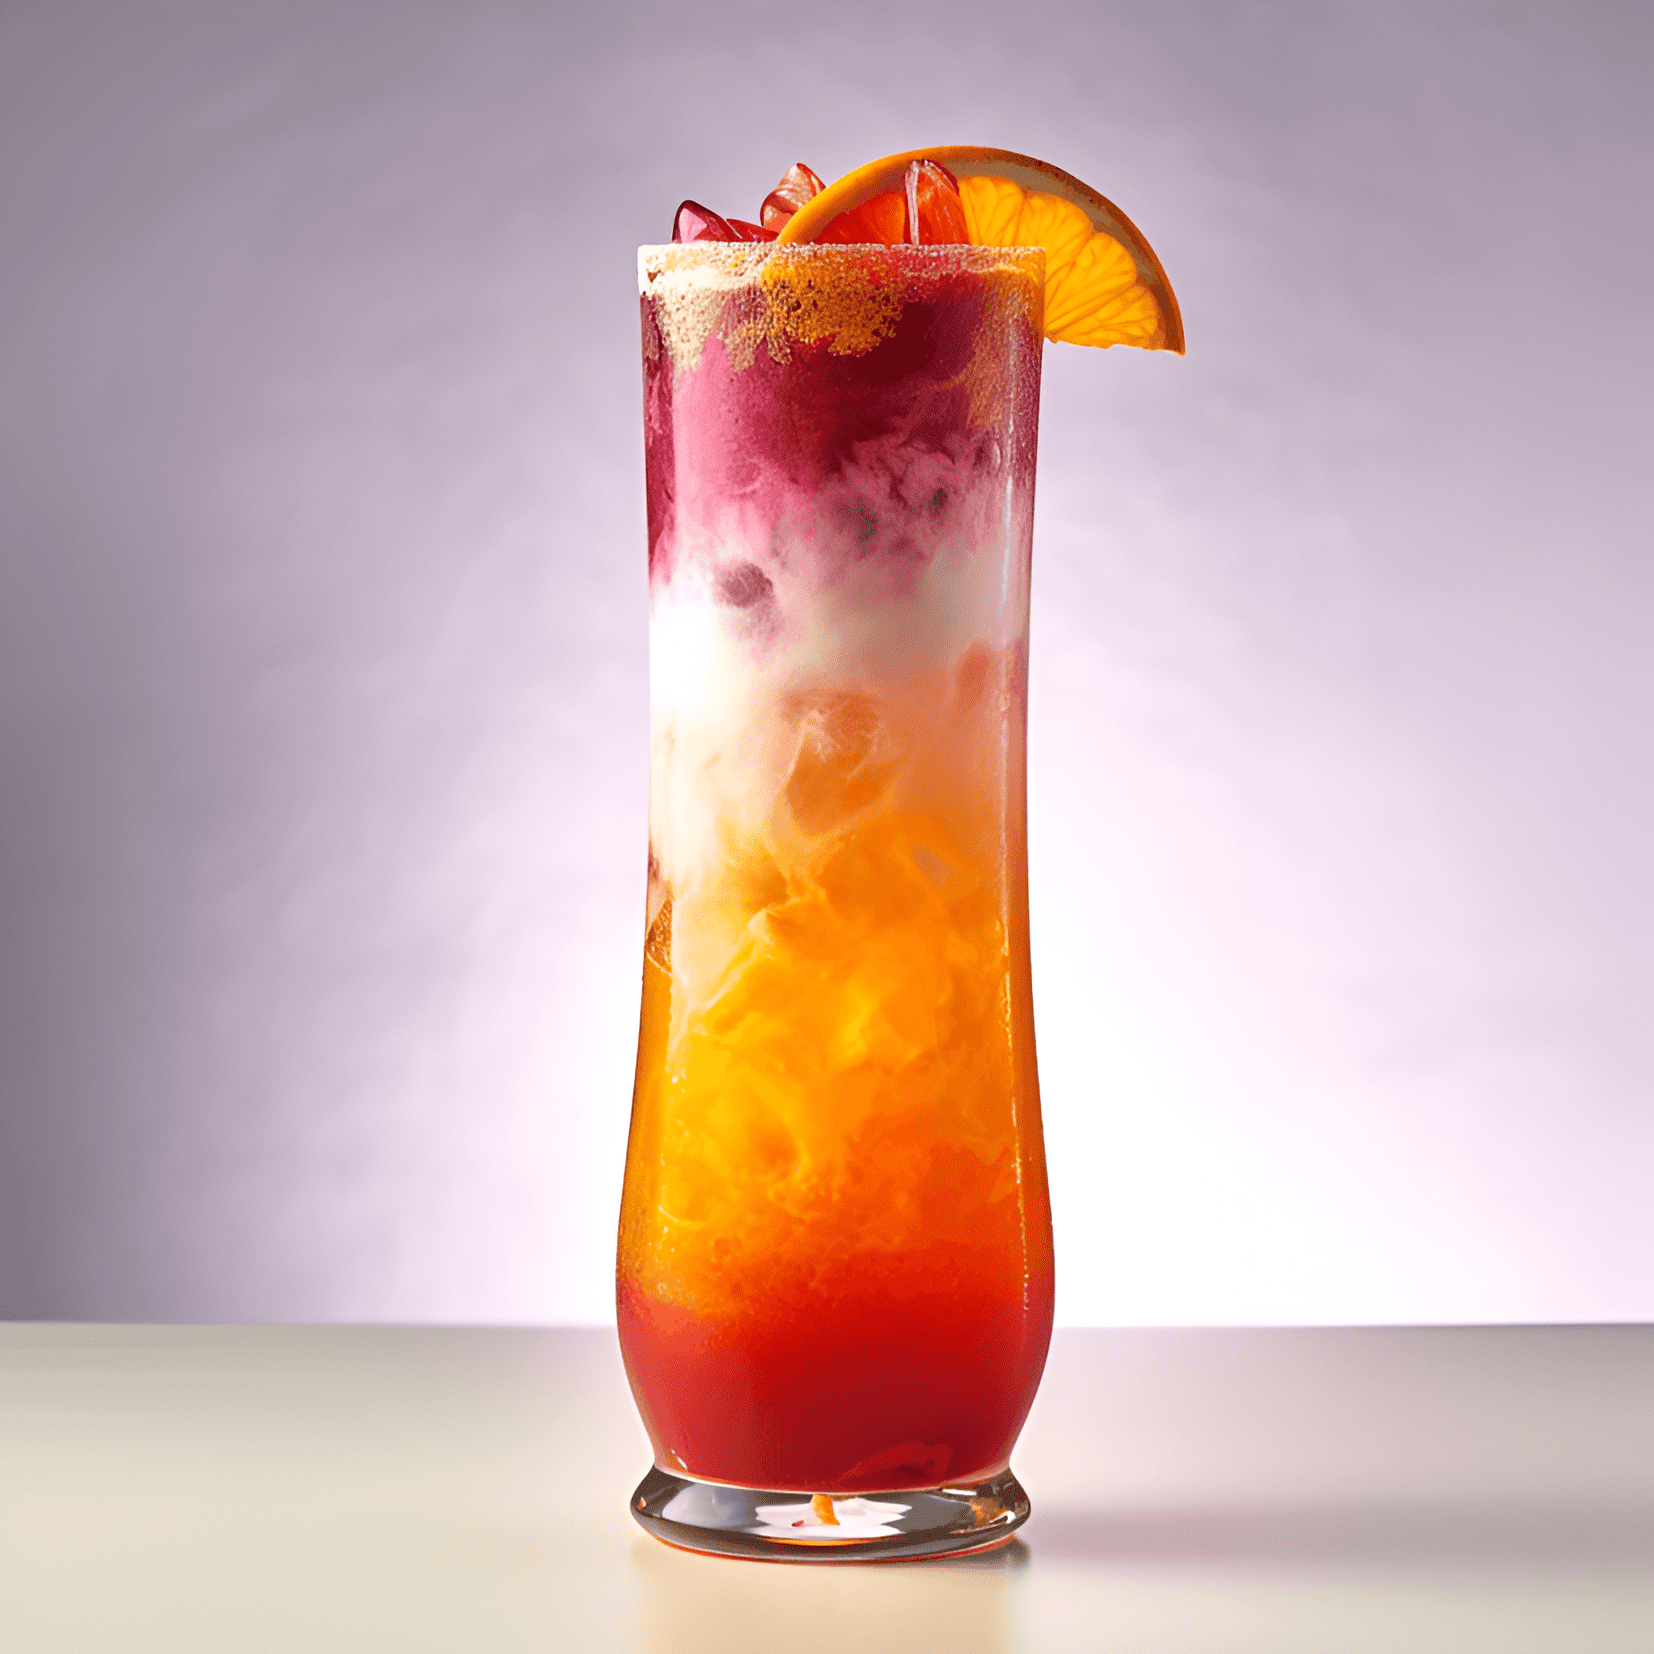 Hurricane Cocktail Recipe - The Hurricane cocktail is a fruity, sweet, and tangy drink with a strong rum kick. The combination of passion fruit, orange, and lime flavors creates a refreshing and tropical taste, while the grenadine adds a touch of sweetness.